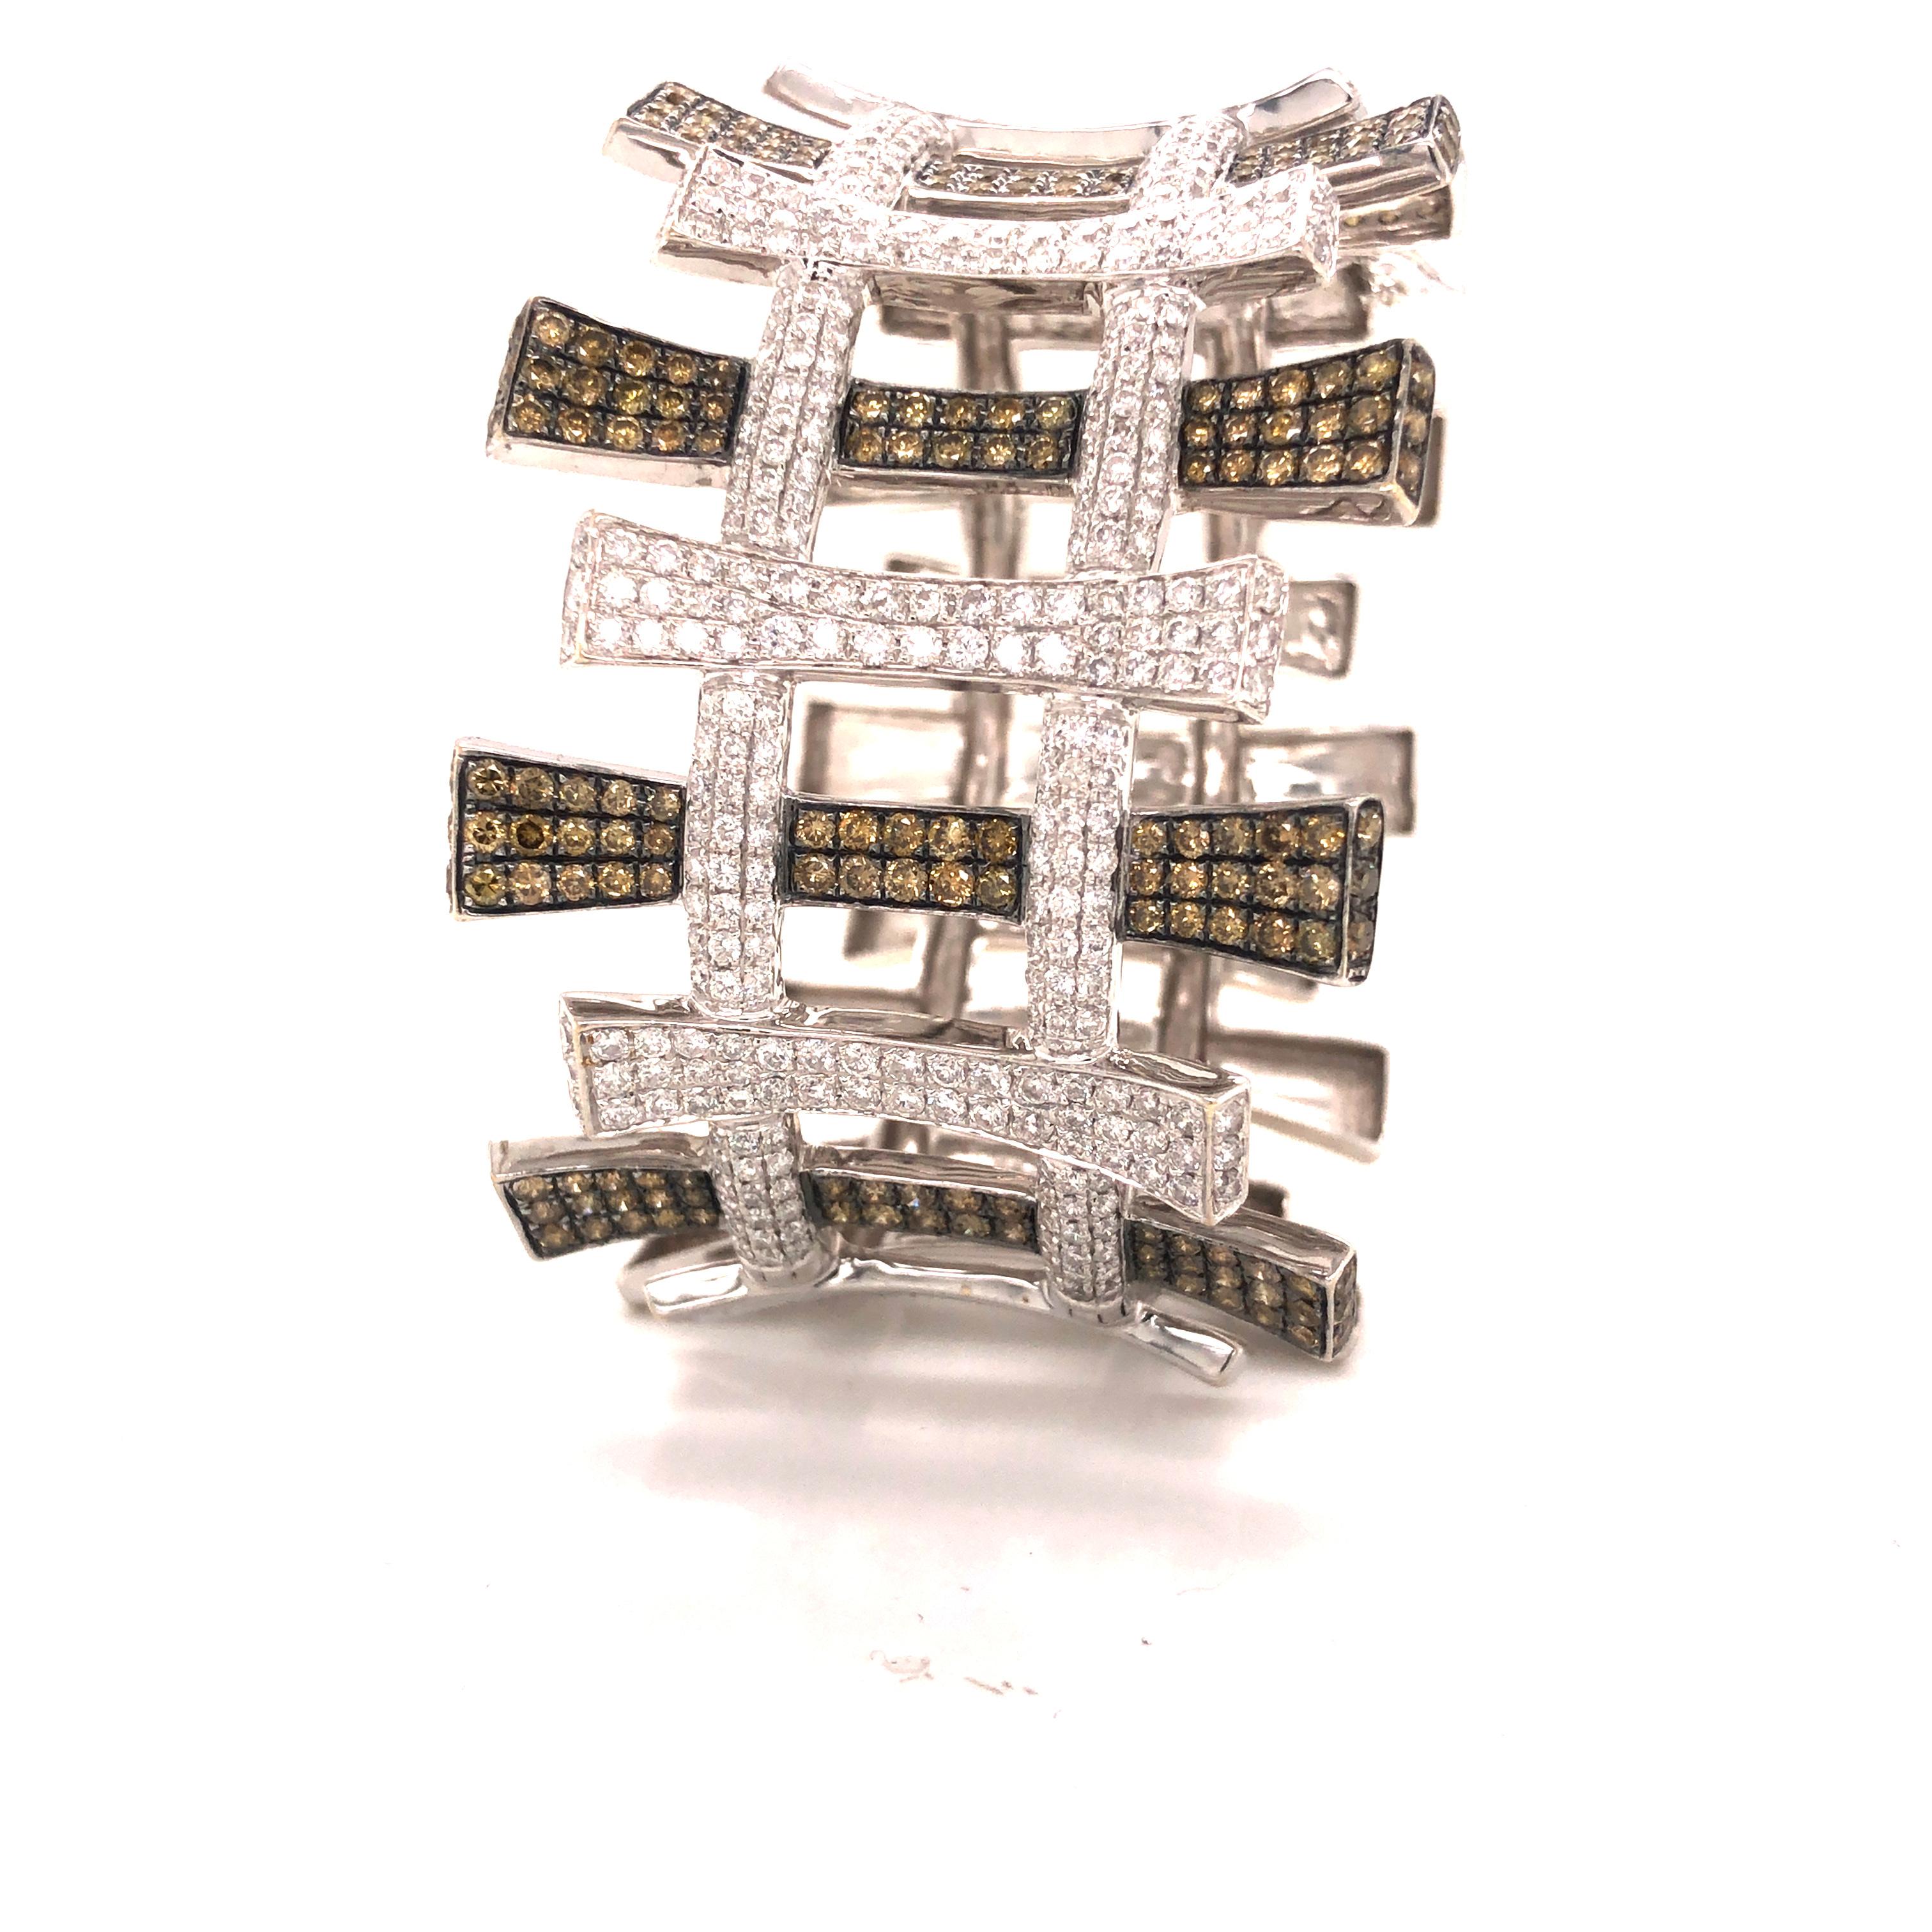 Amazing cuff bracelet crafted in 18k white gold.  This large design will surely fill up your wrist and be the talk of the night whenever worn. White and Cognac brown natural diamonds are set throughout the design. A total of 12.80 ct. are set into